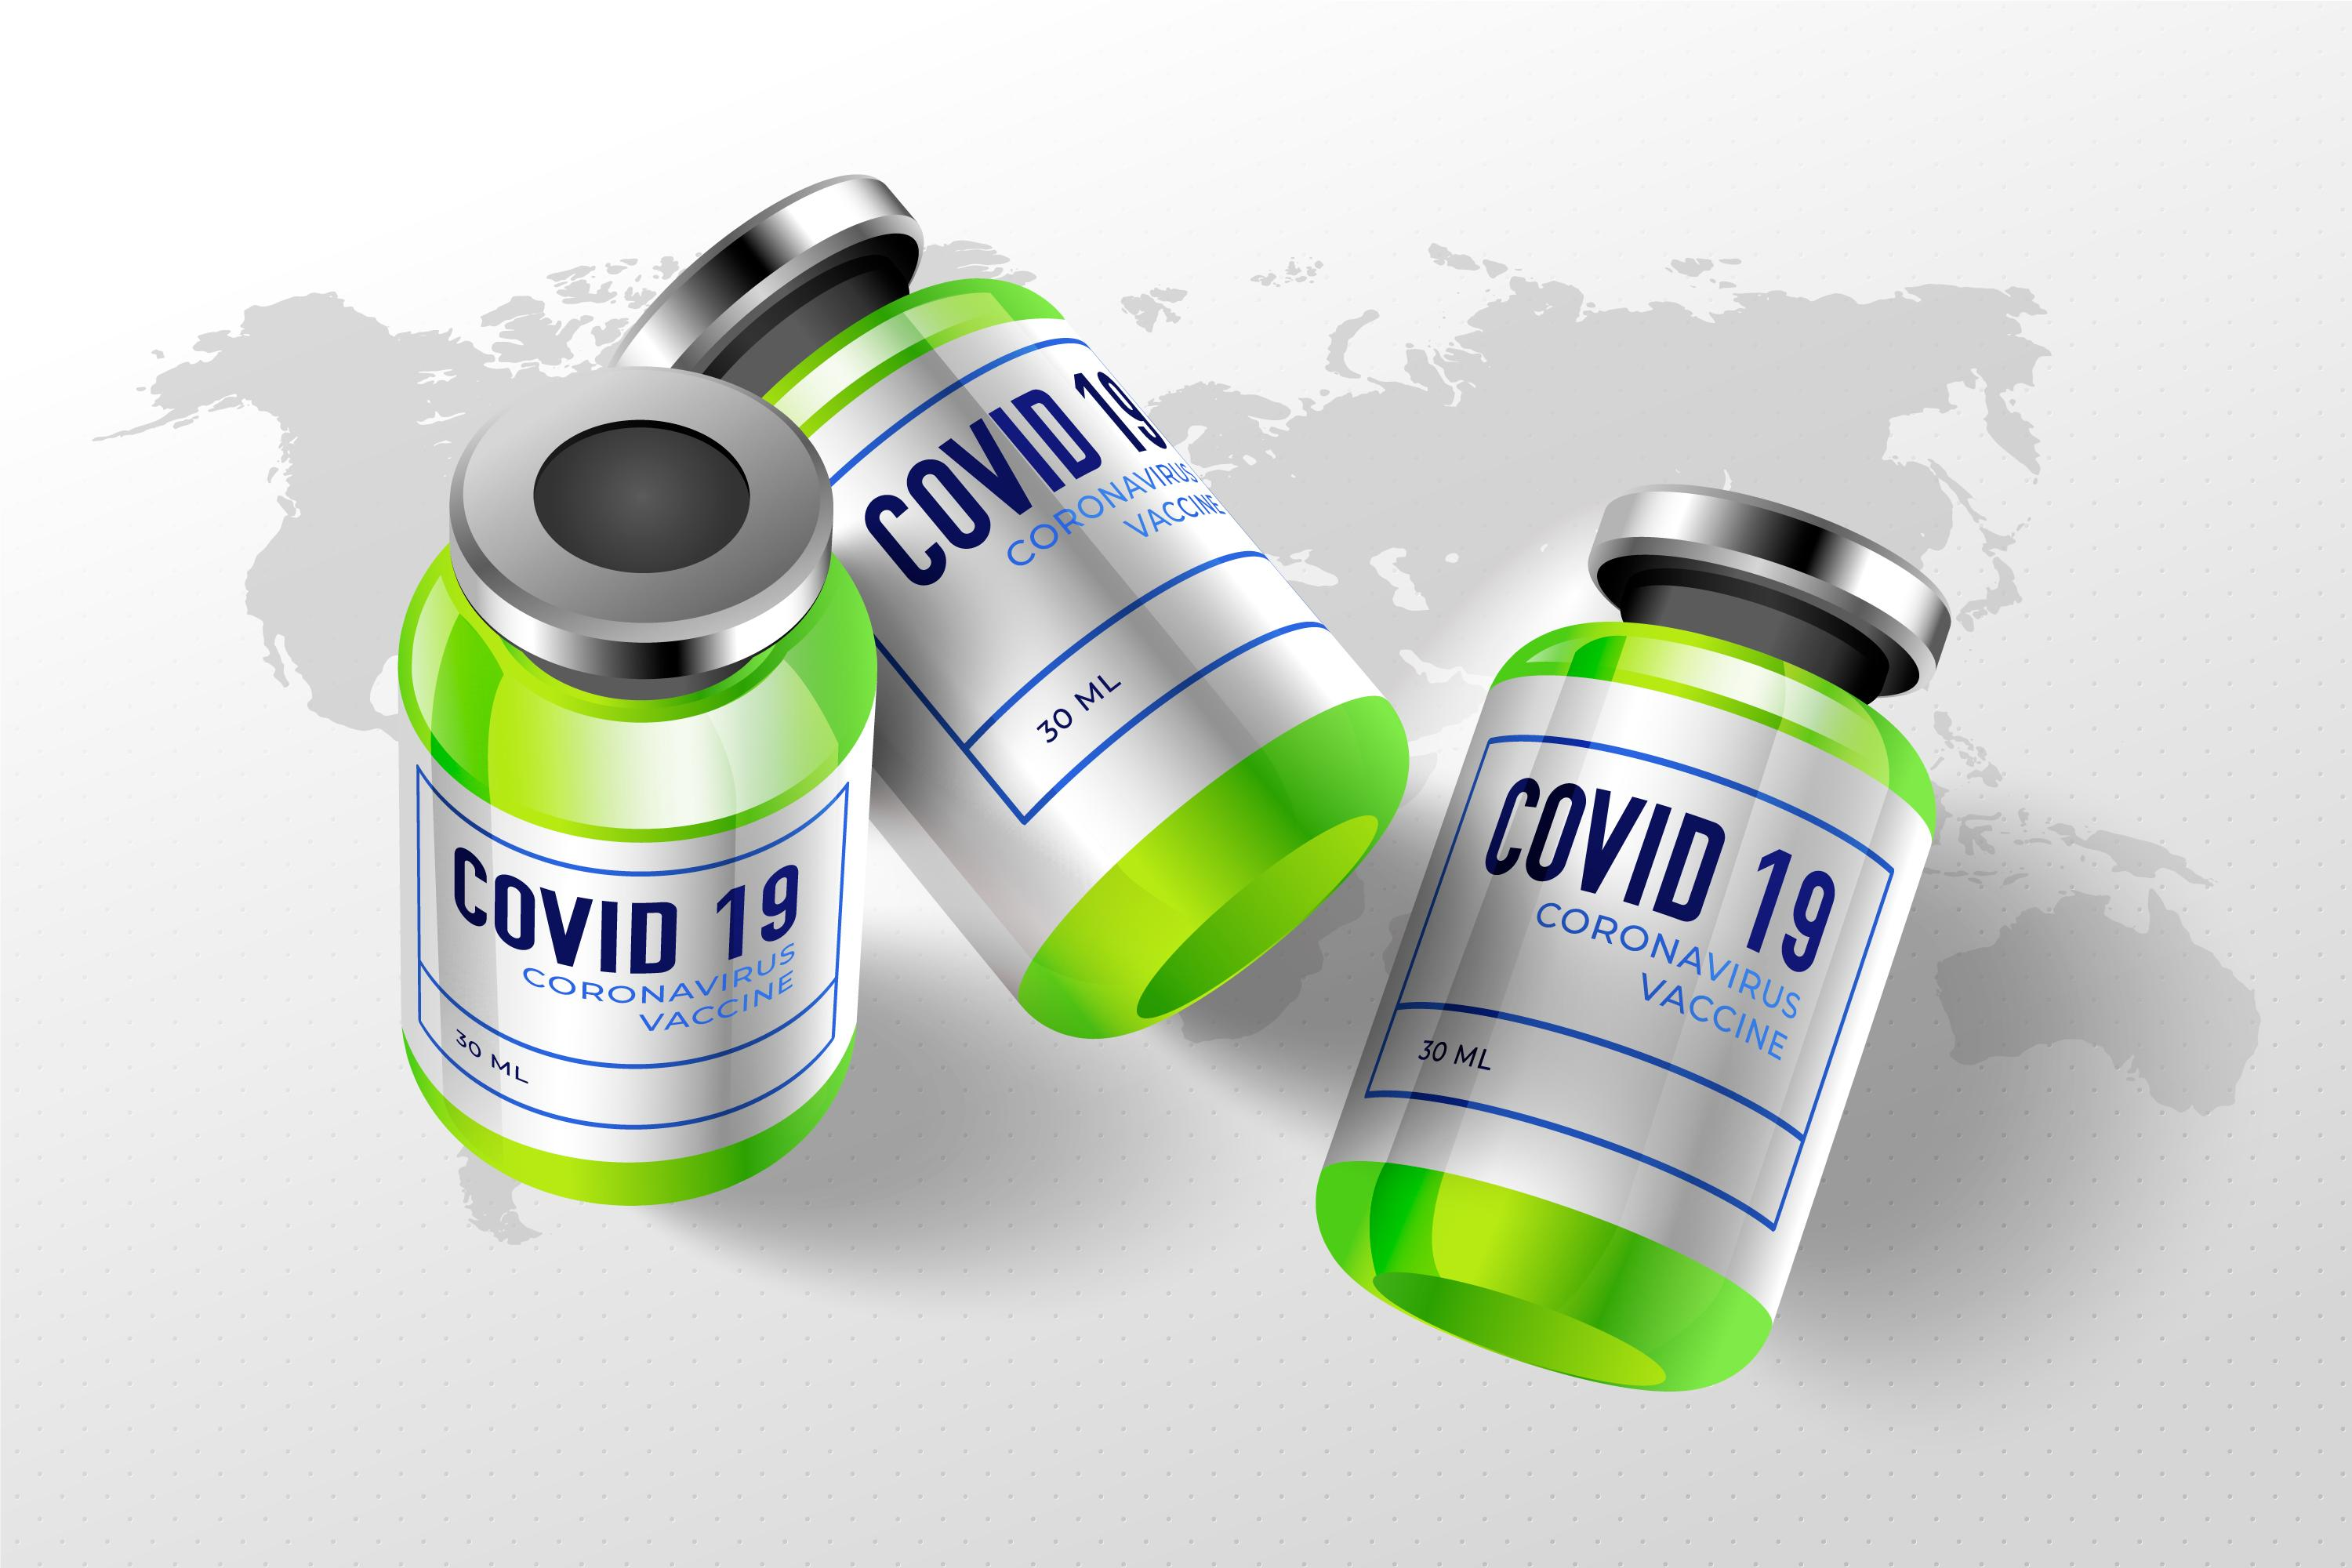 The COVID vaccine created hope throughout the globe.